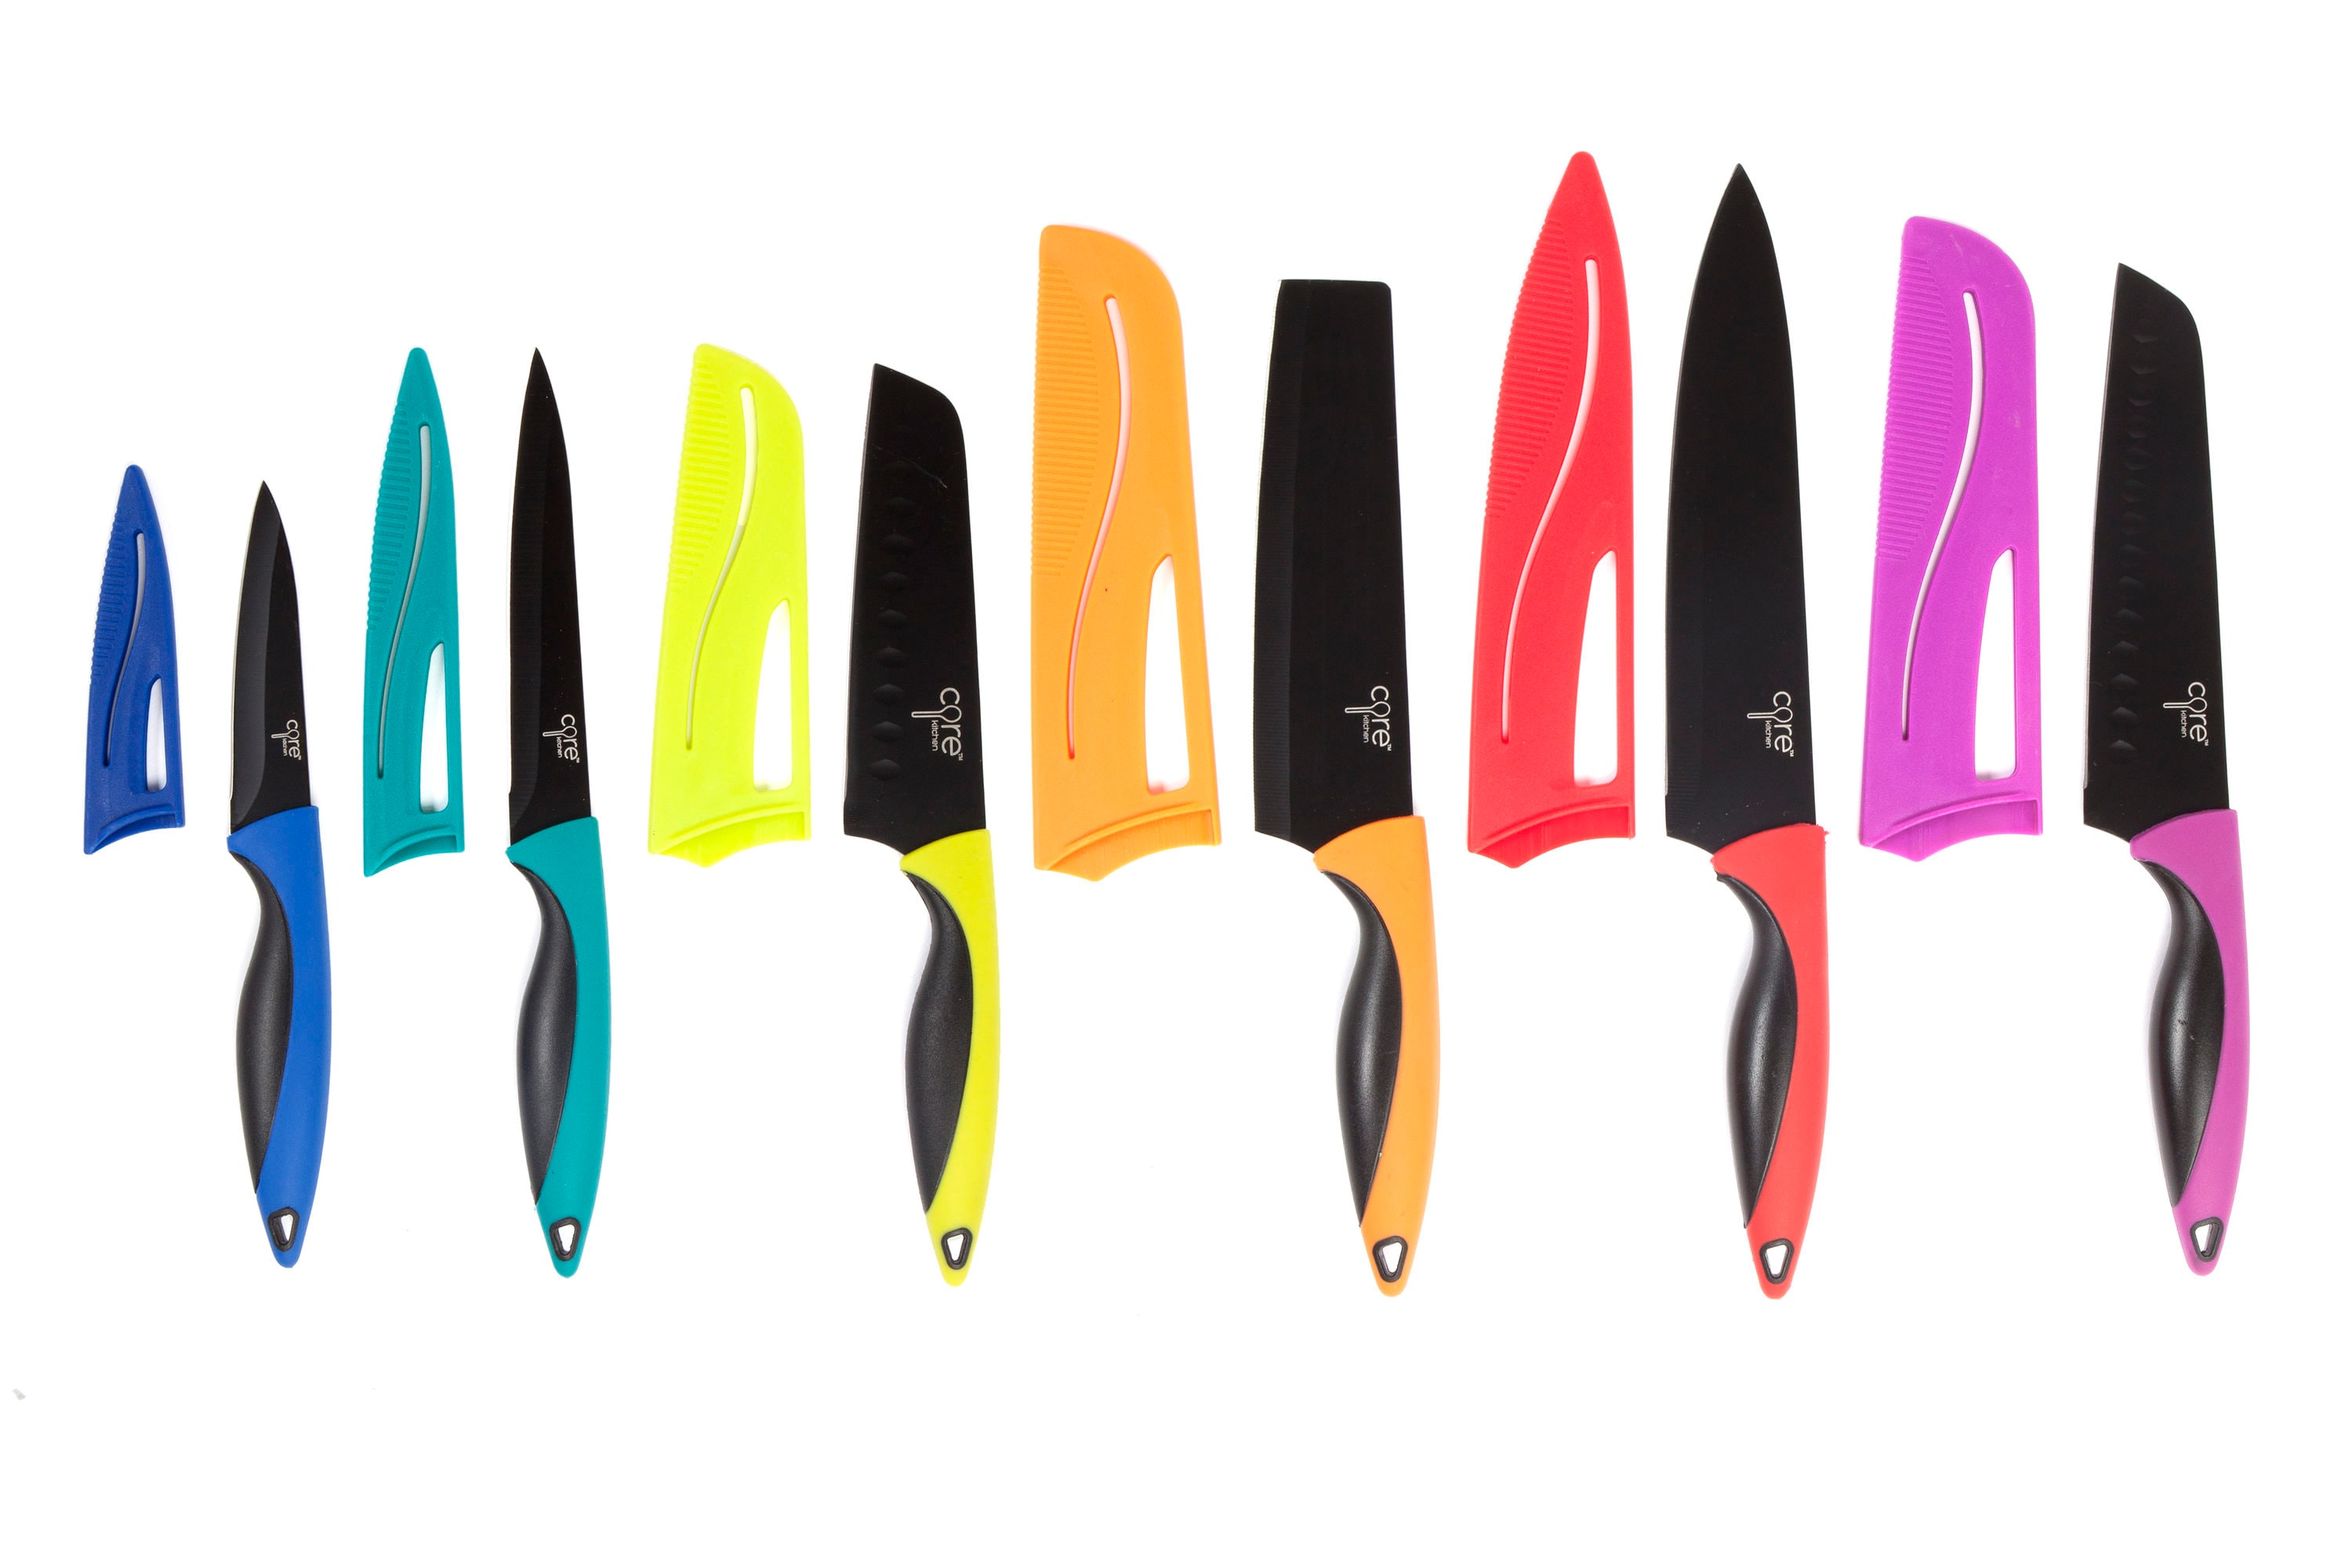 Core Home Perfect Precision 12pc Knife Set - Stainless Steel Blades,  Ergonomic Handle, Multiple Colors - Ideal for Precision Cutting and  Chopping in the Cutlery department at